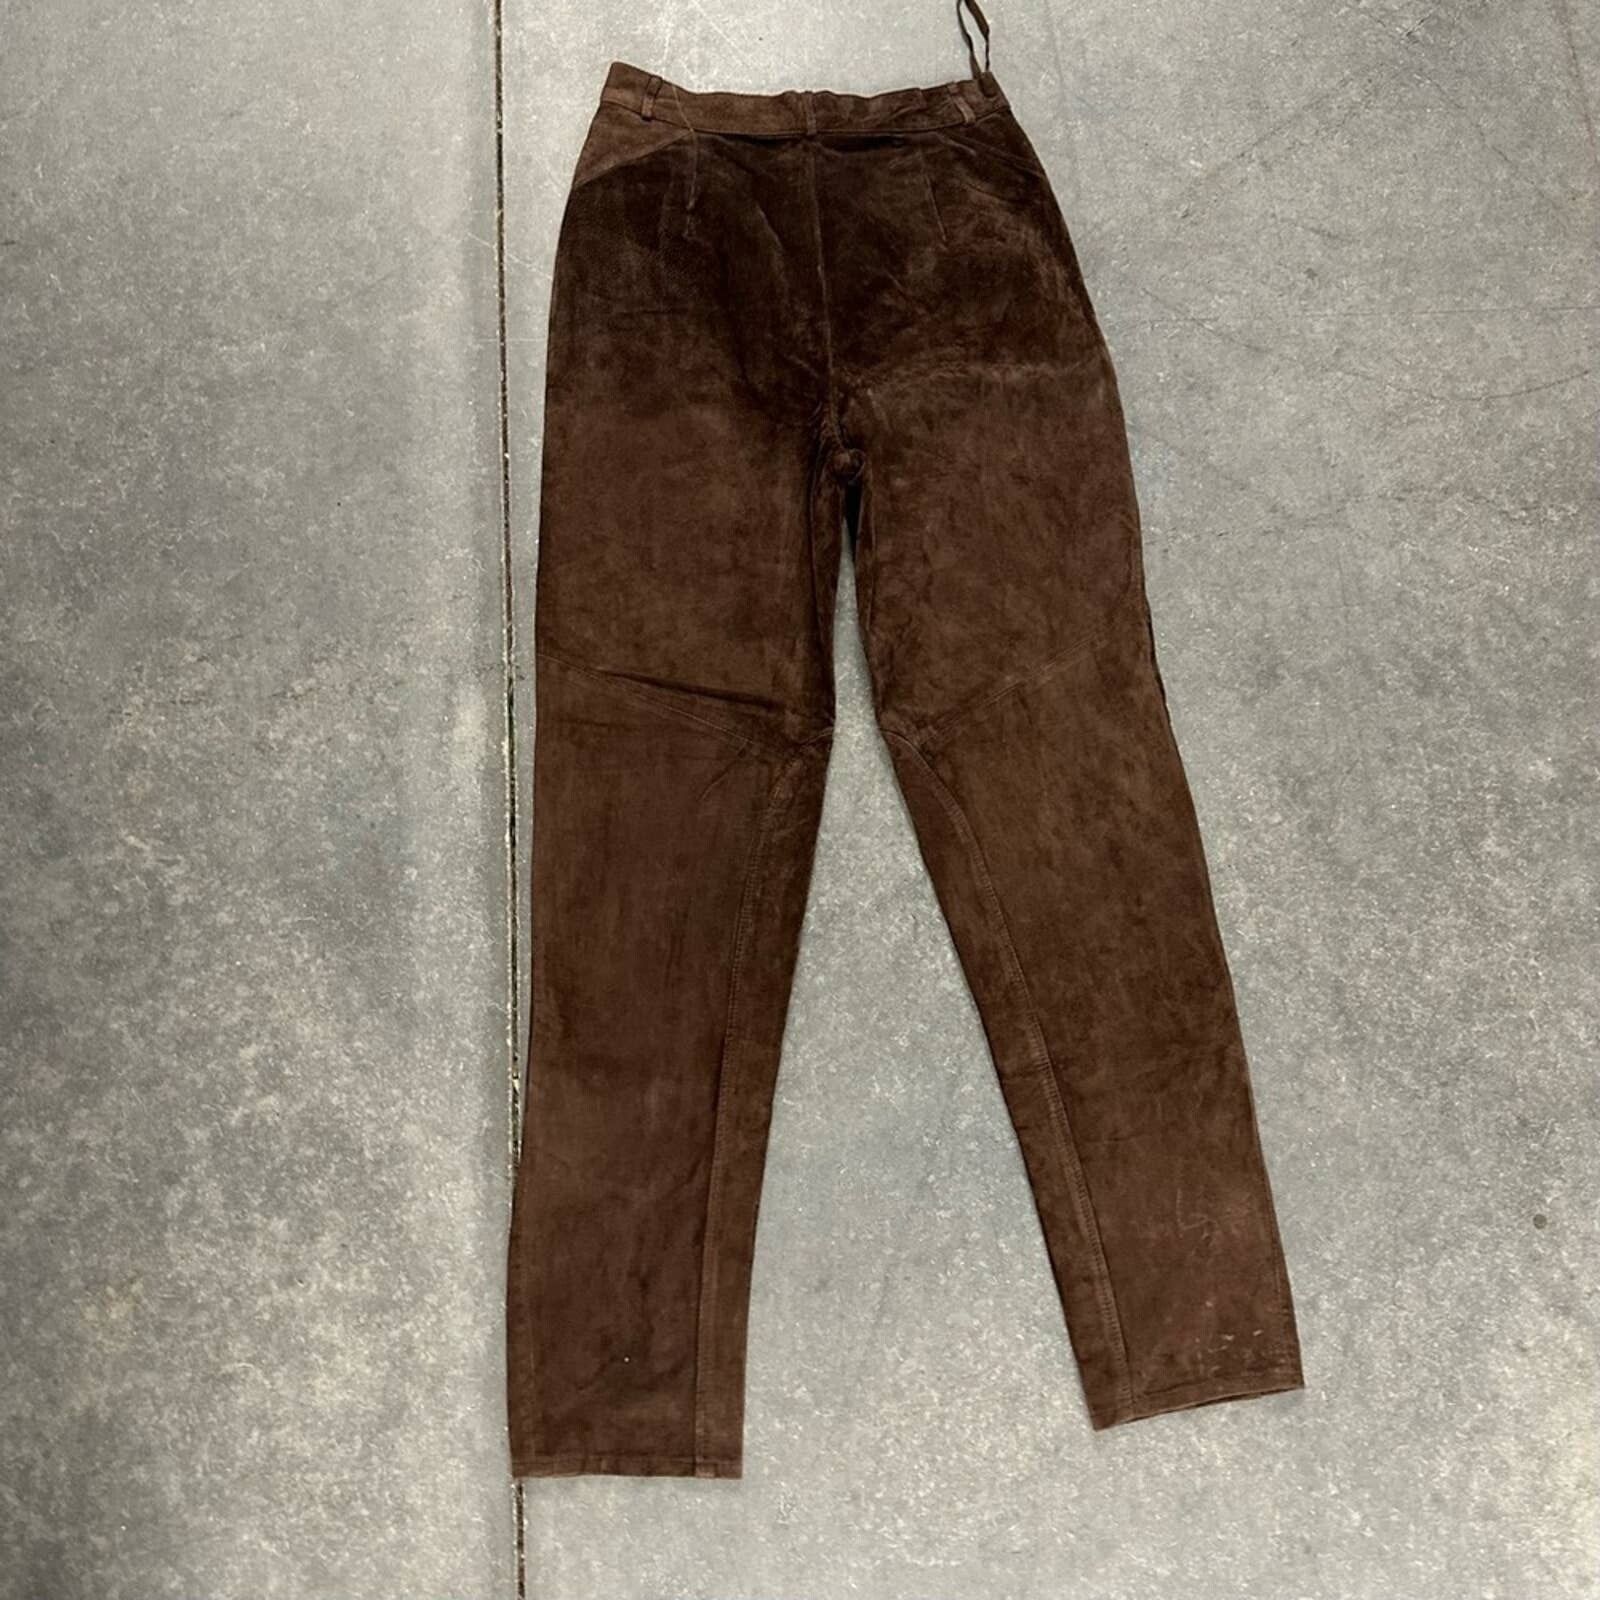 Vintage Vintage 80s 90s brown suede leather tapered pants 10 Size 32" / US 10 / IT 46 - 2 Preview